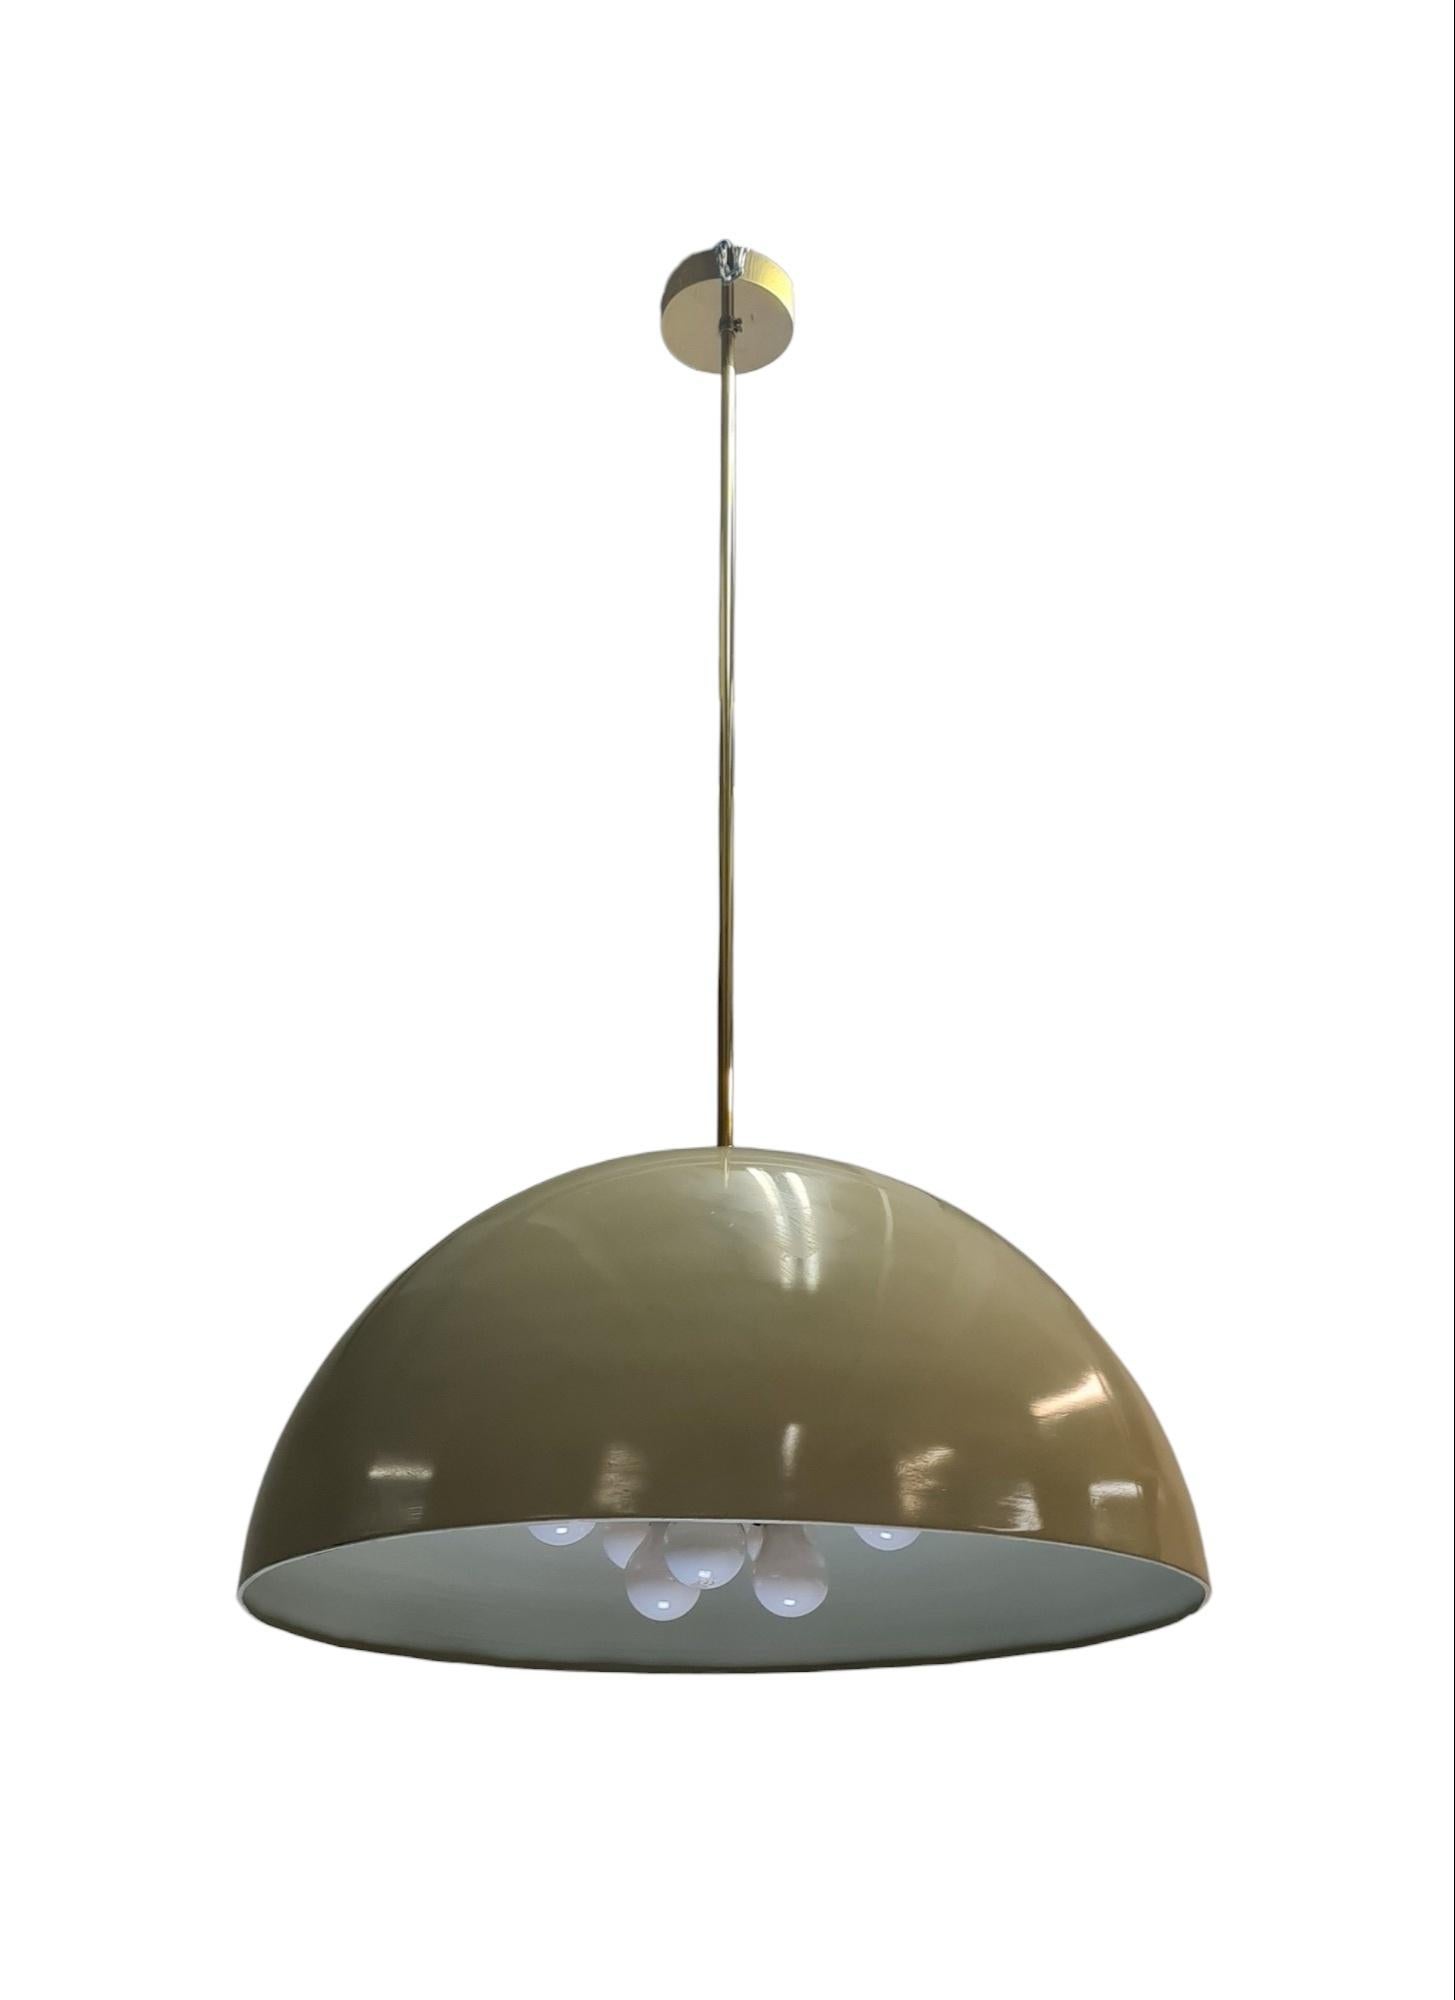 Scandinavian Modern Paavo Tynell Aulanko Hotel Ceiling Lamp For Sale